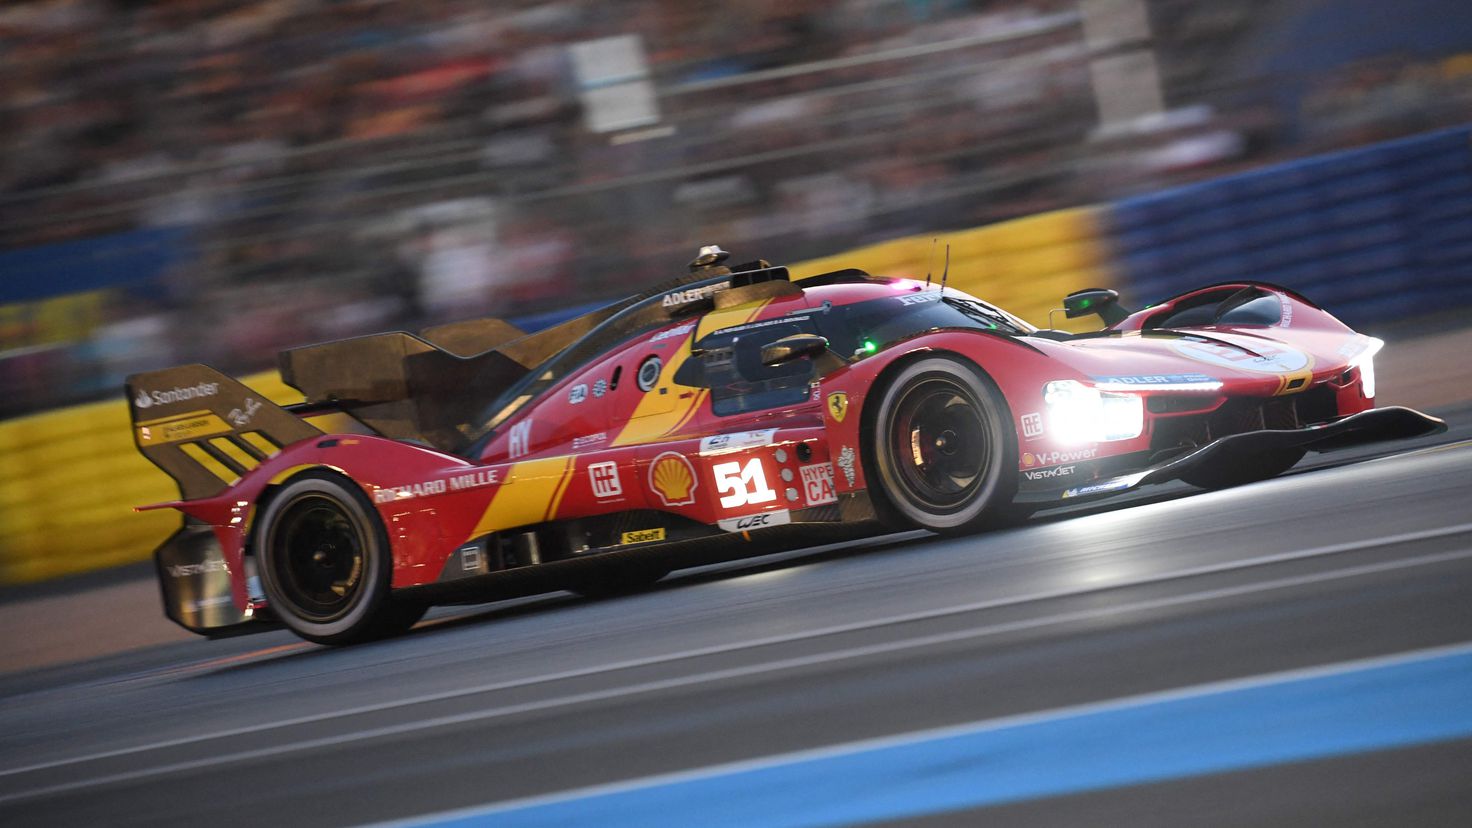 Chaos reigns at Le Mans
